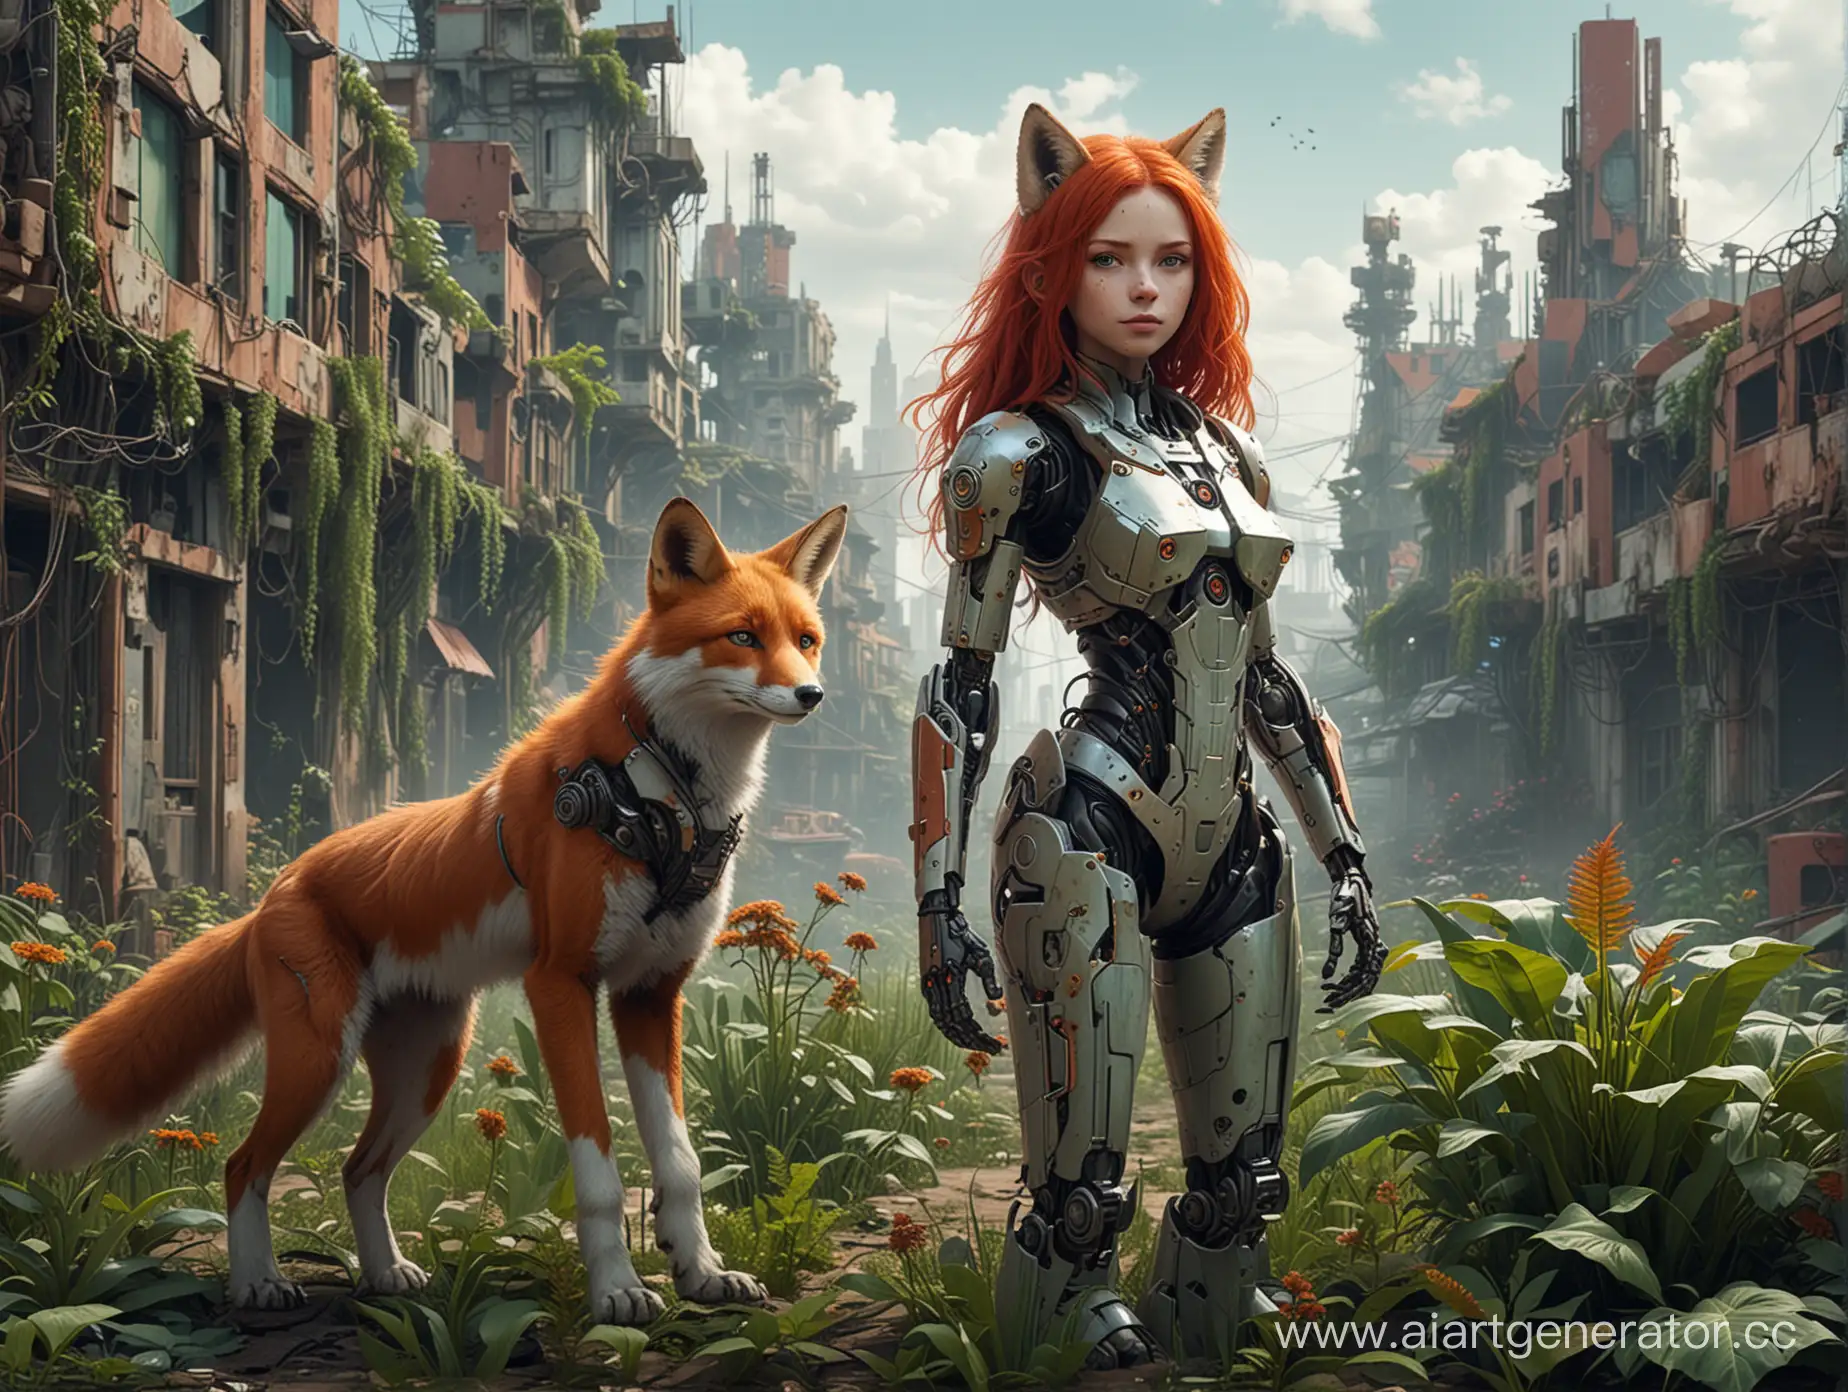 An abandoned city covered with plants. A red-haired cyborg girl with a pet fox robot